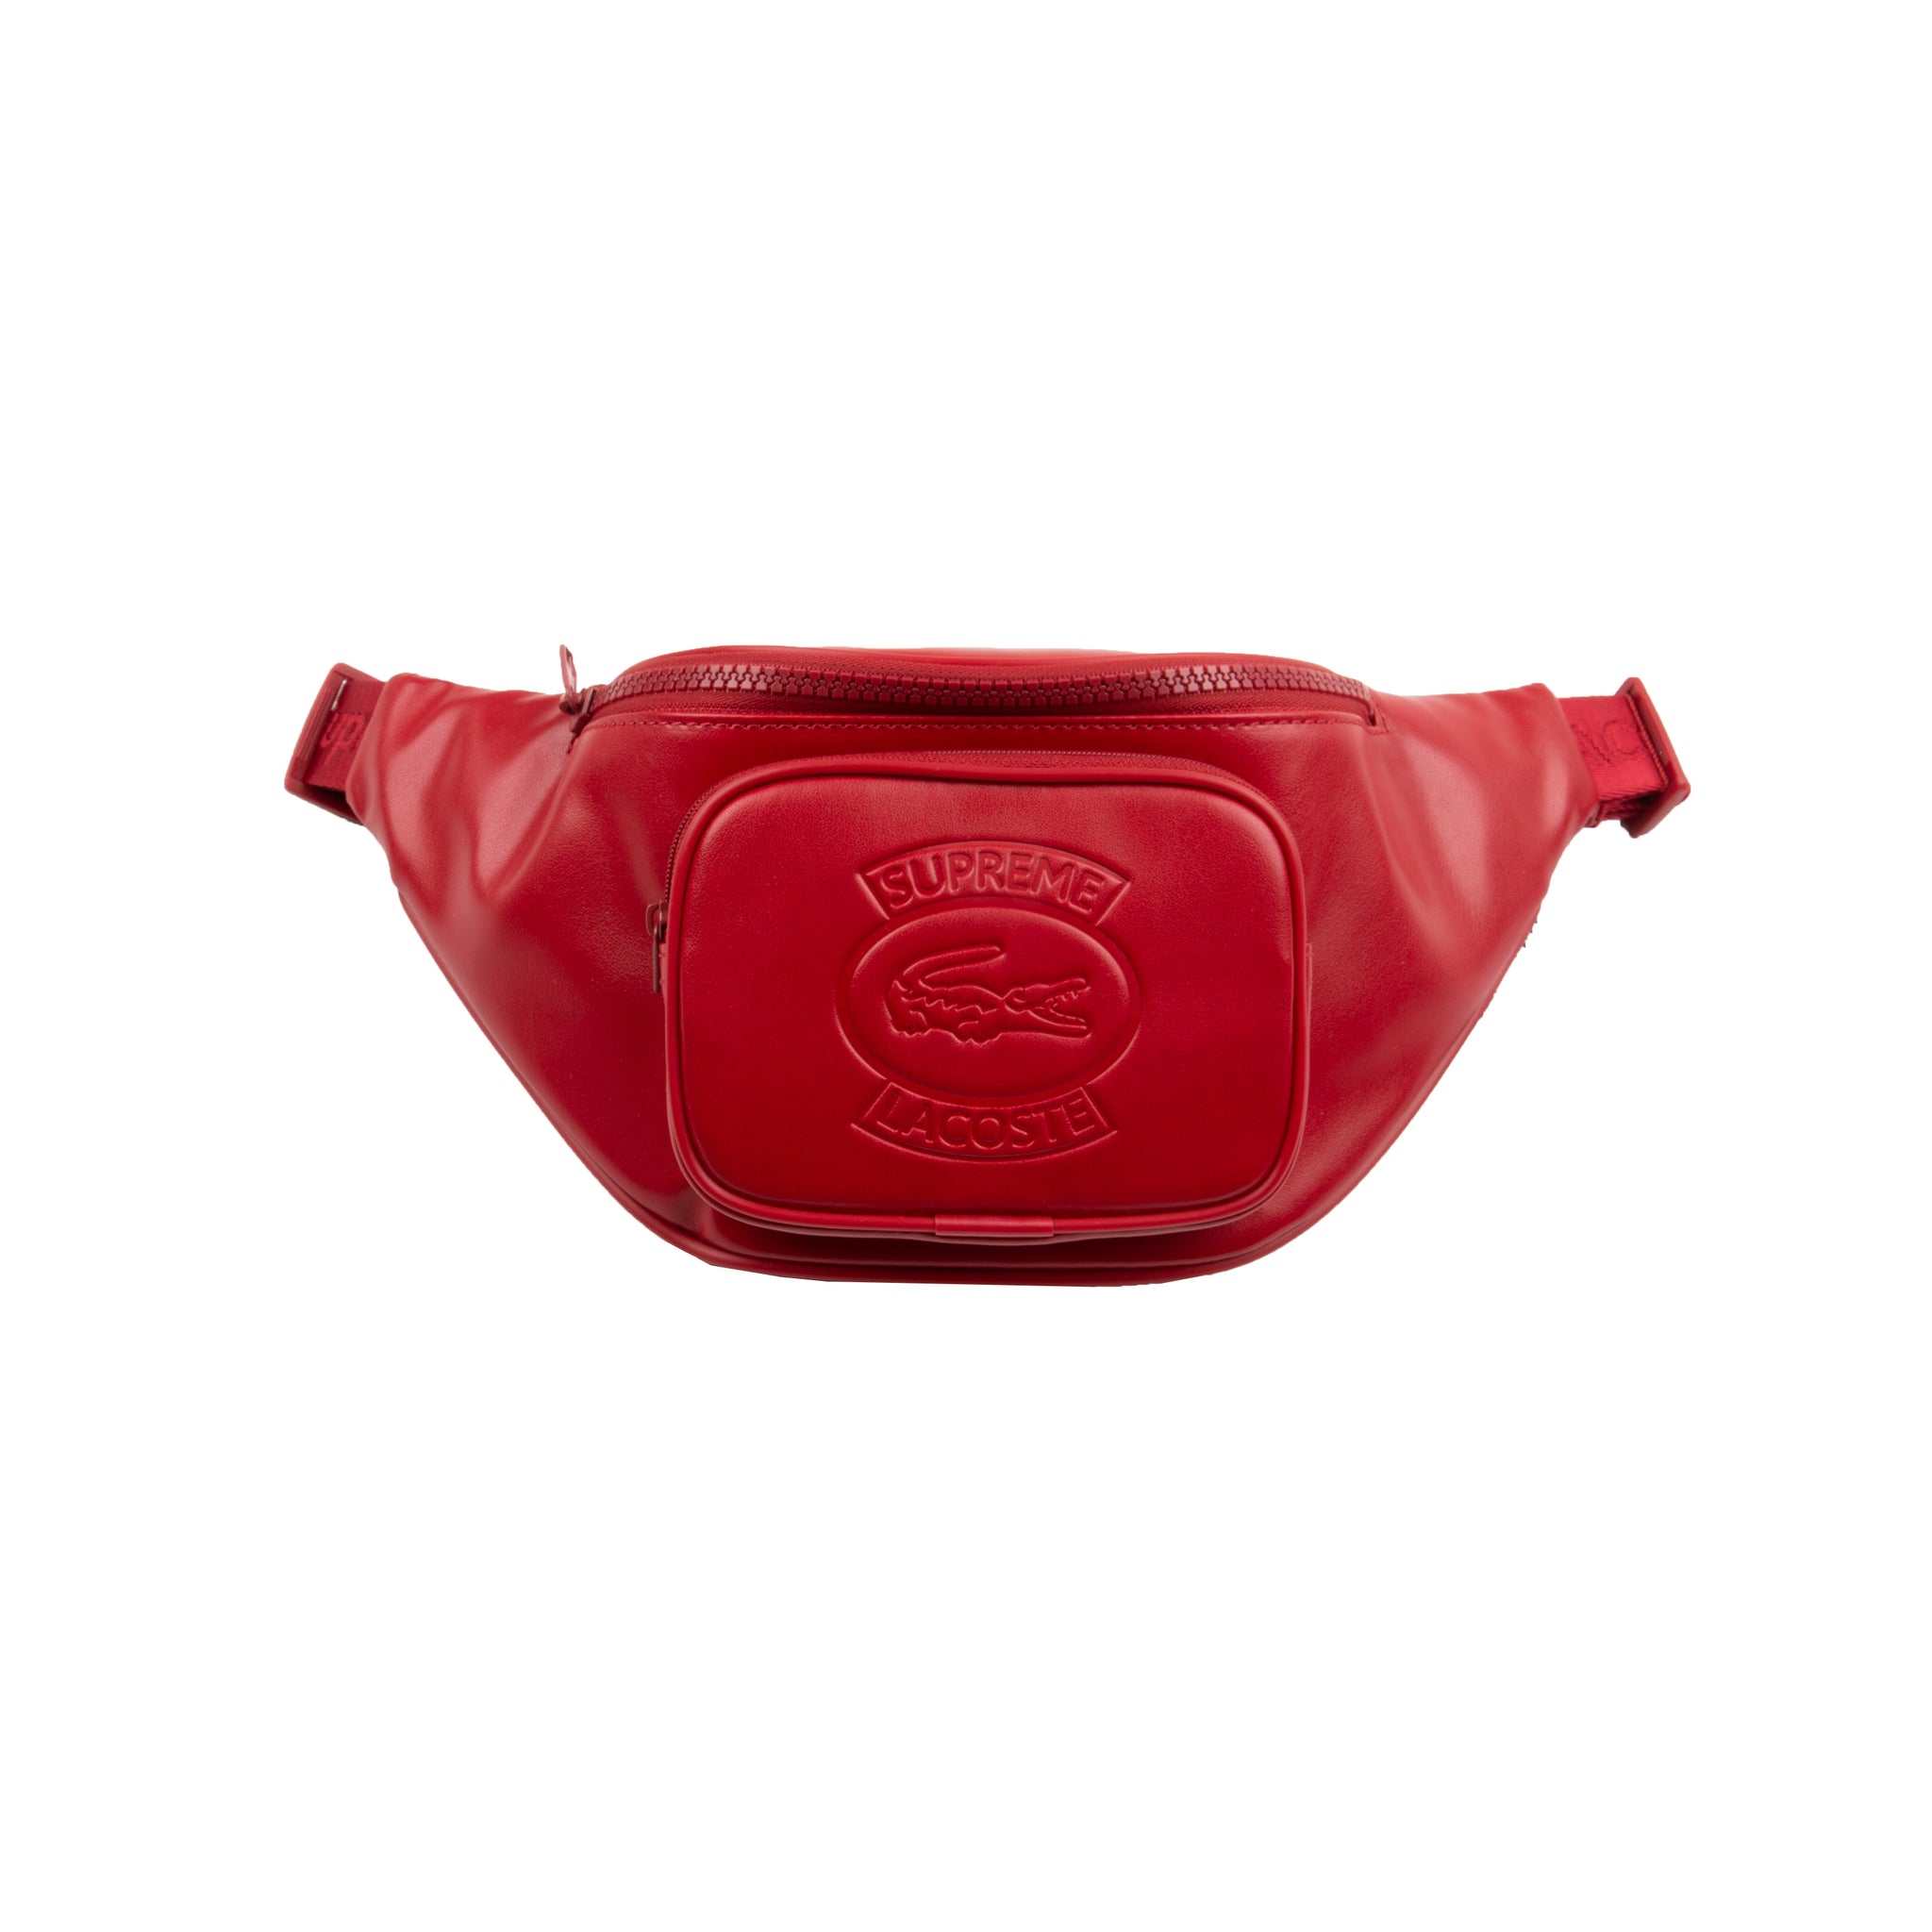 Supreme Red Lacoste Waist Bag – On The Arm